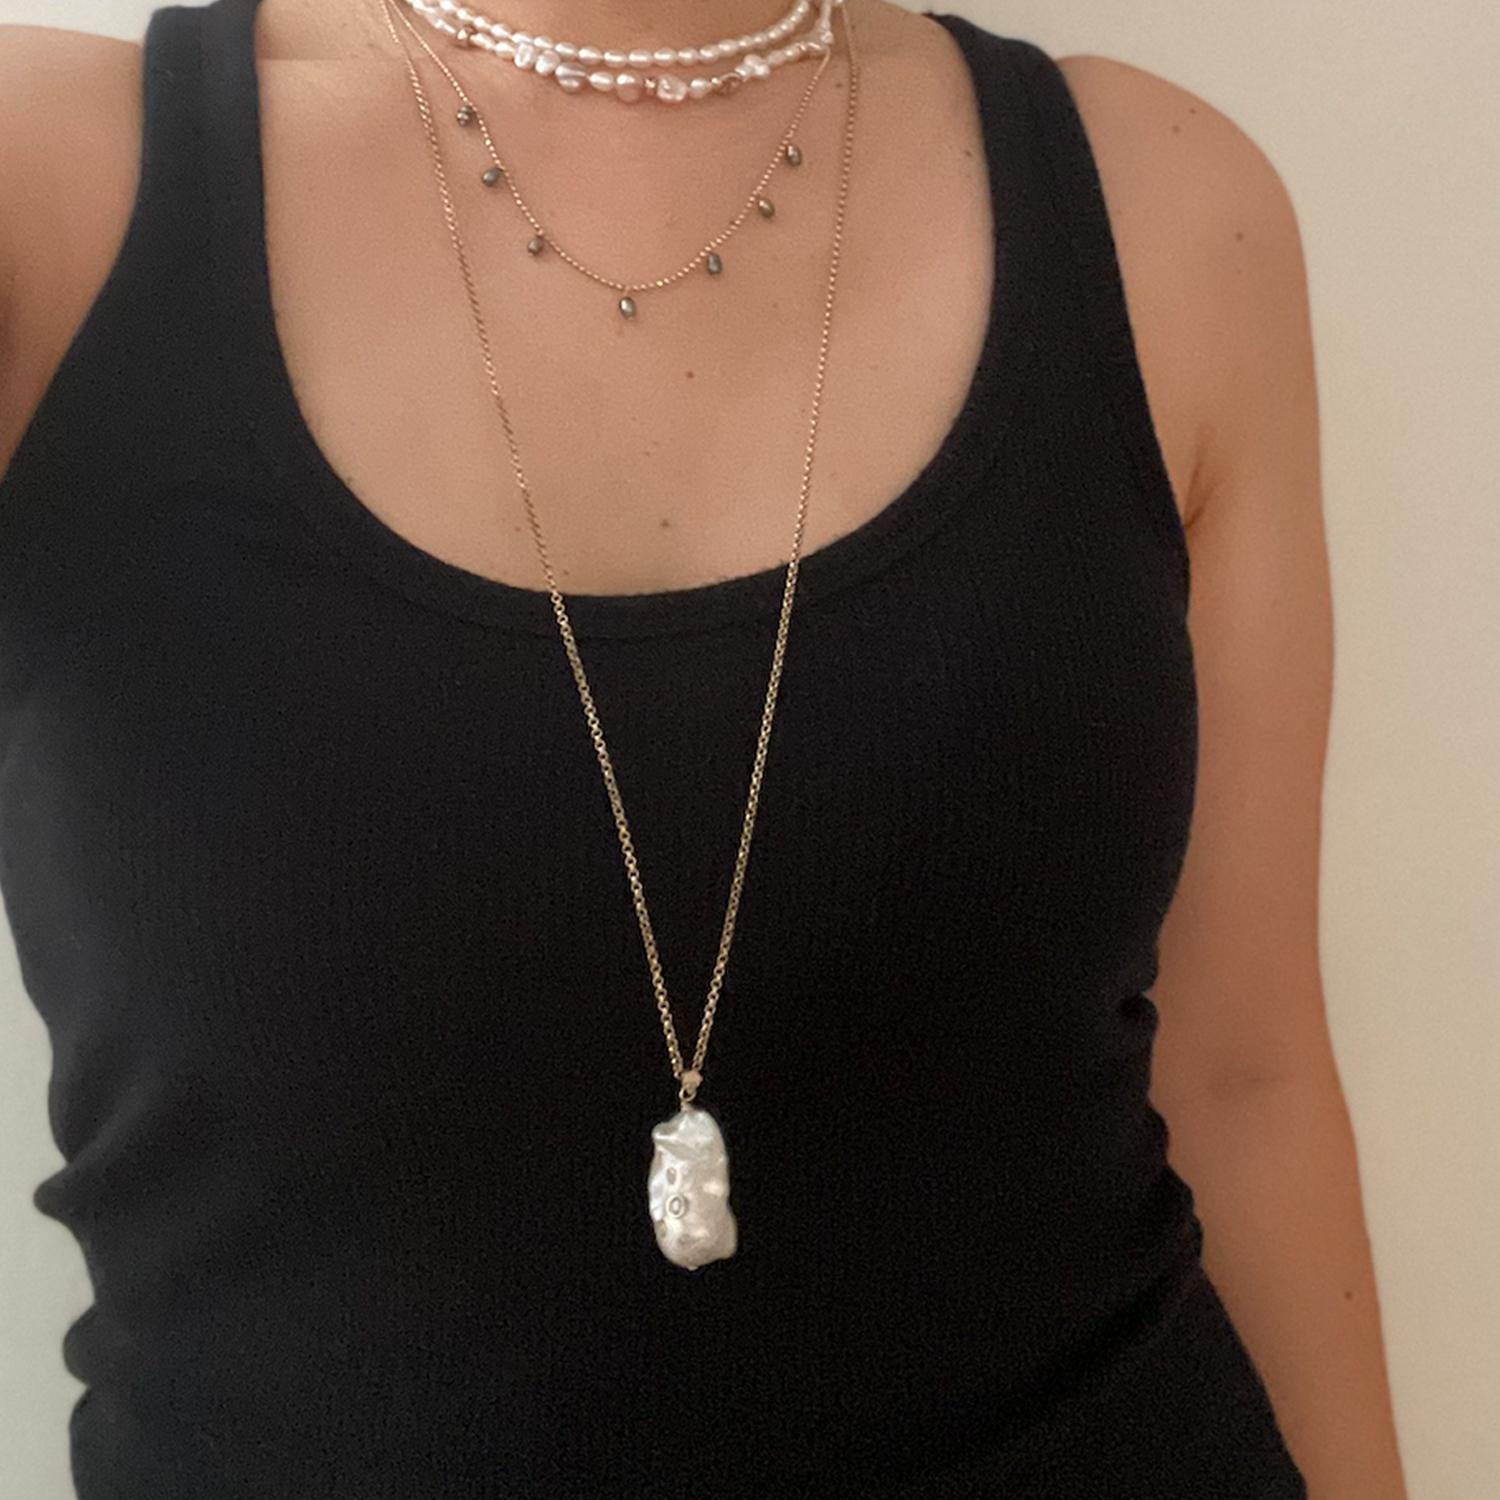 This is a statement Baroque Pearl pendant inlaid with Diamonds on heavy cable chain, making it perfect for layering with your favorite chains, pearls and necklaces.

Looks great from day to night, over a tank top or turtleneck this pearl pendant is